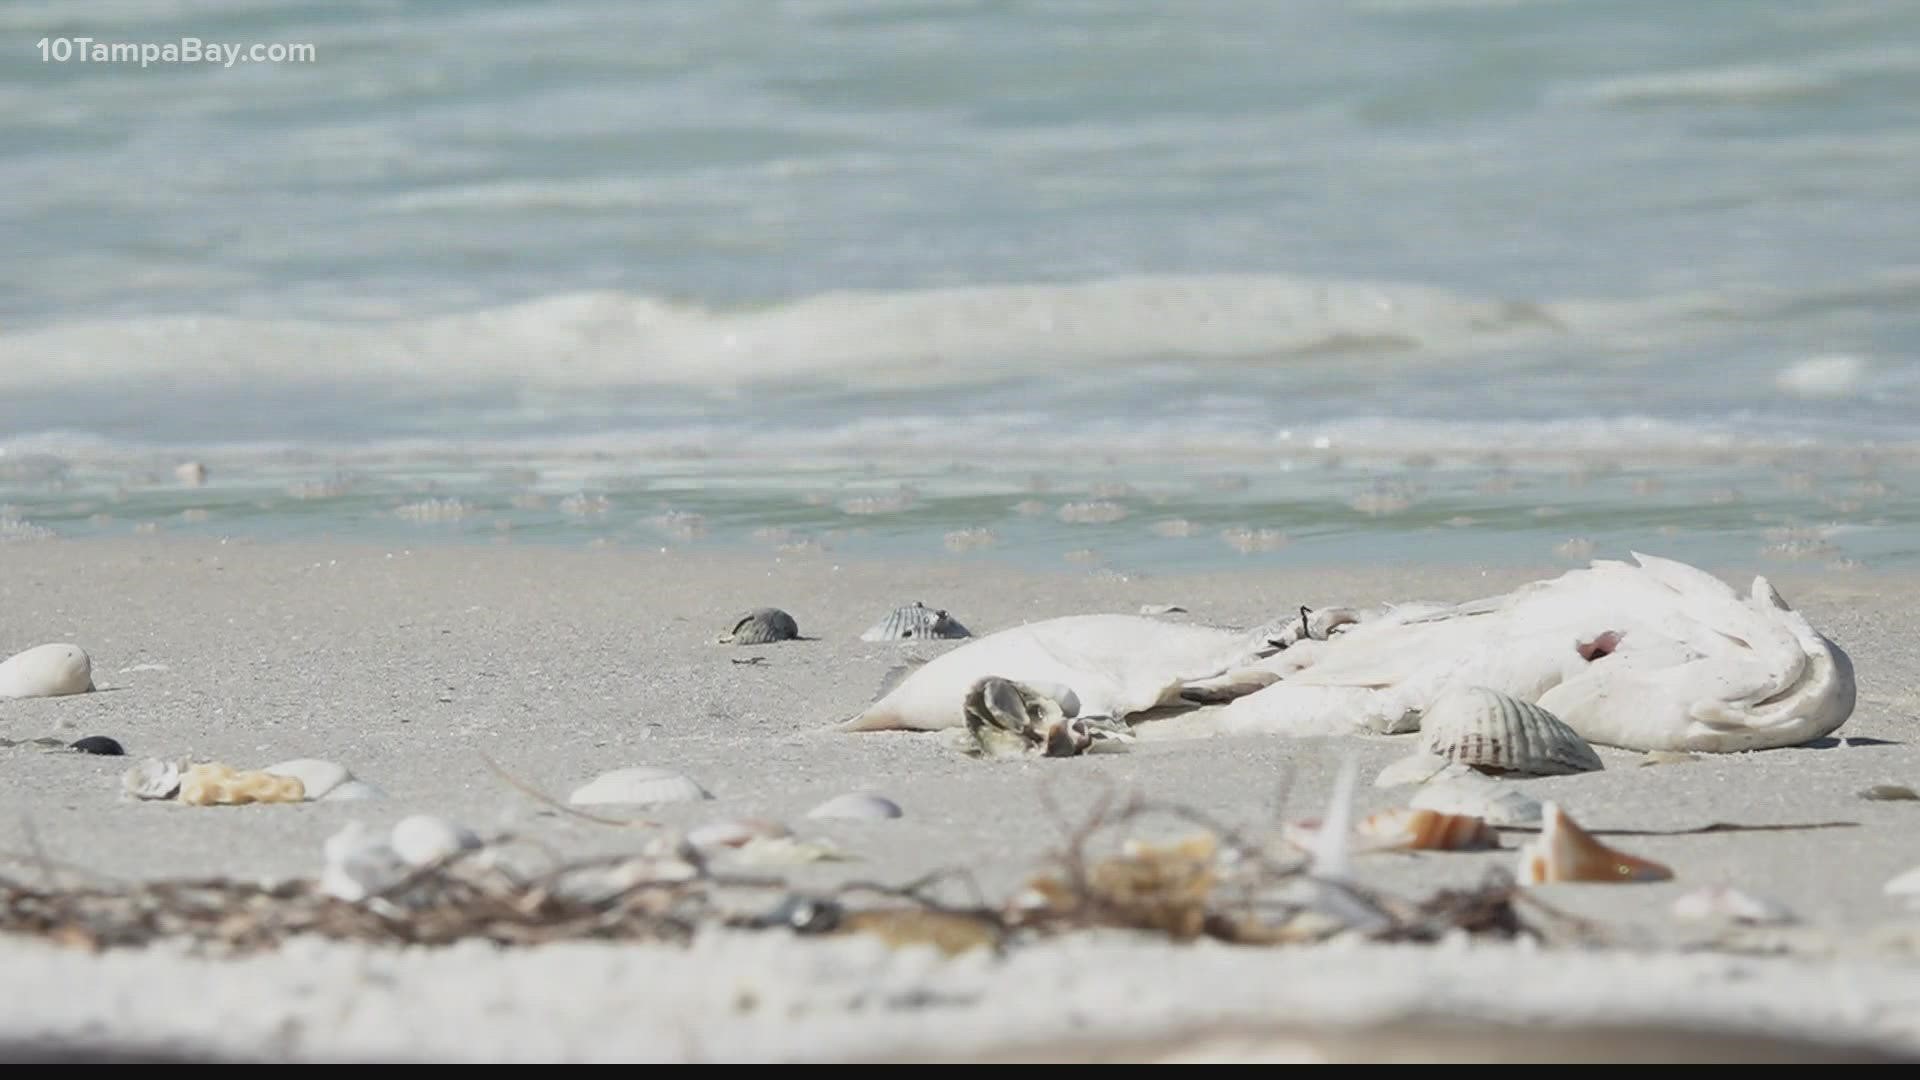 Dead fish are still washing ashore on Pinellas County beaches. In spite of that, the most recent report shows conditions are improving.